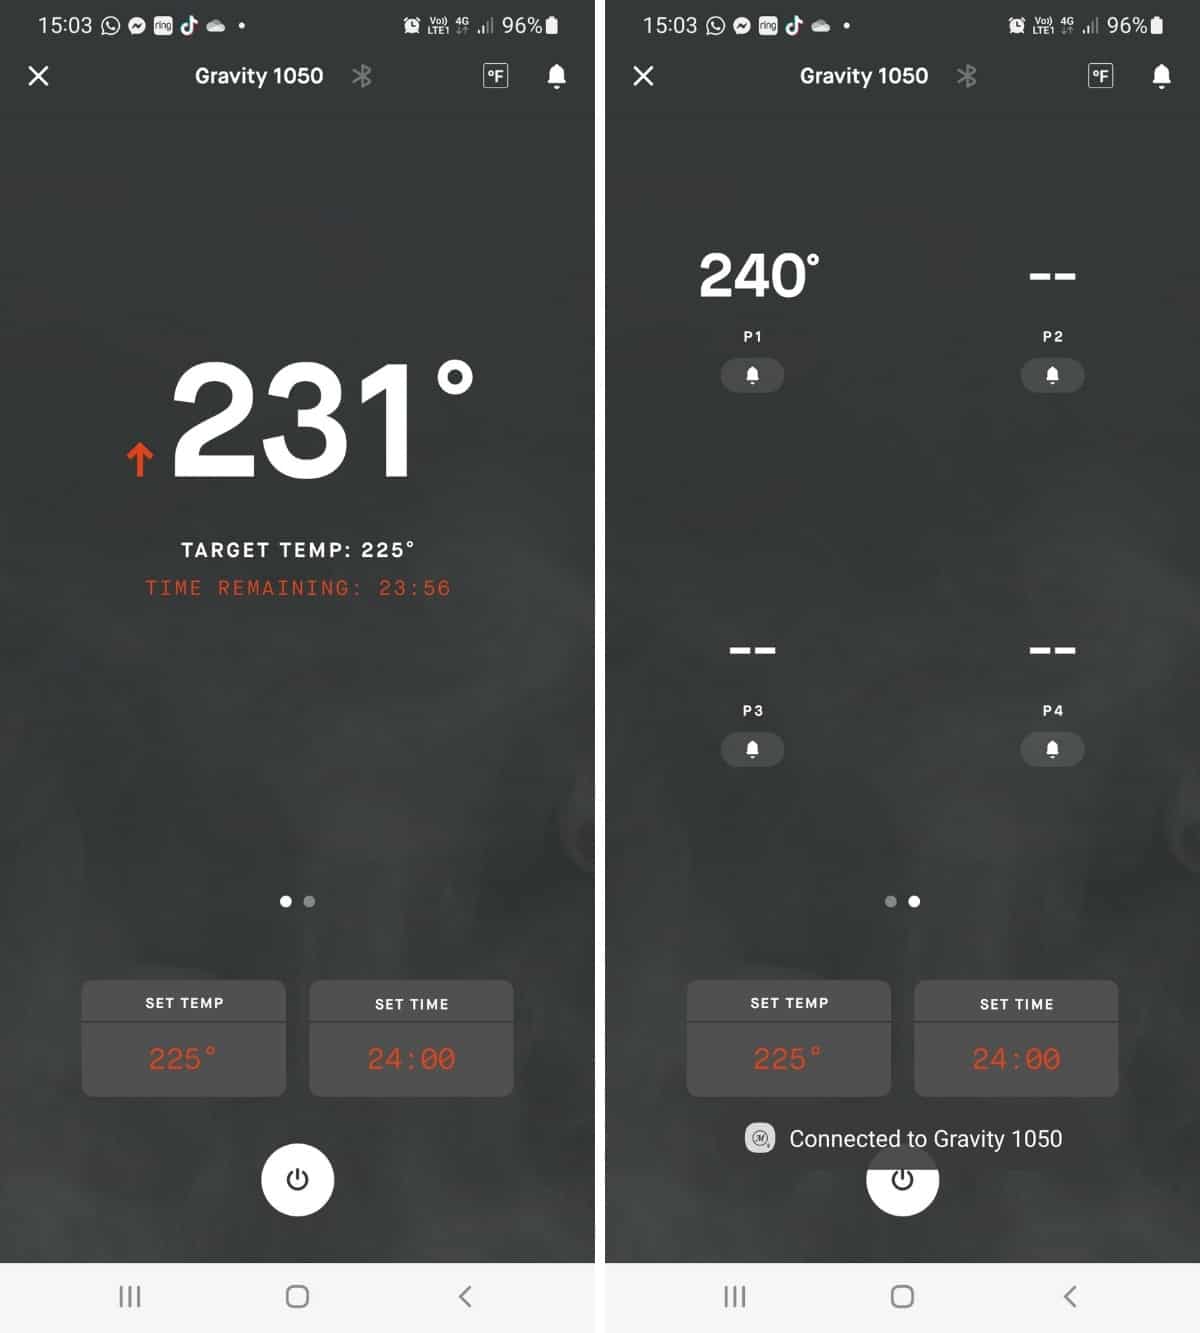 Masterbuilt app screenshots showing the attached thermometer probe and pit probe temperatures